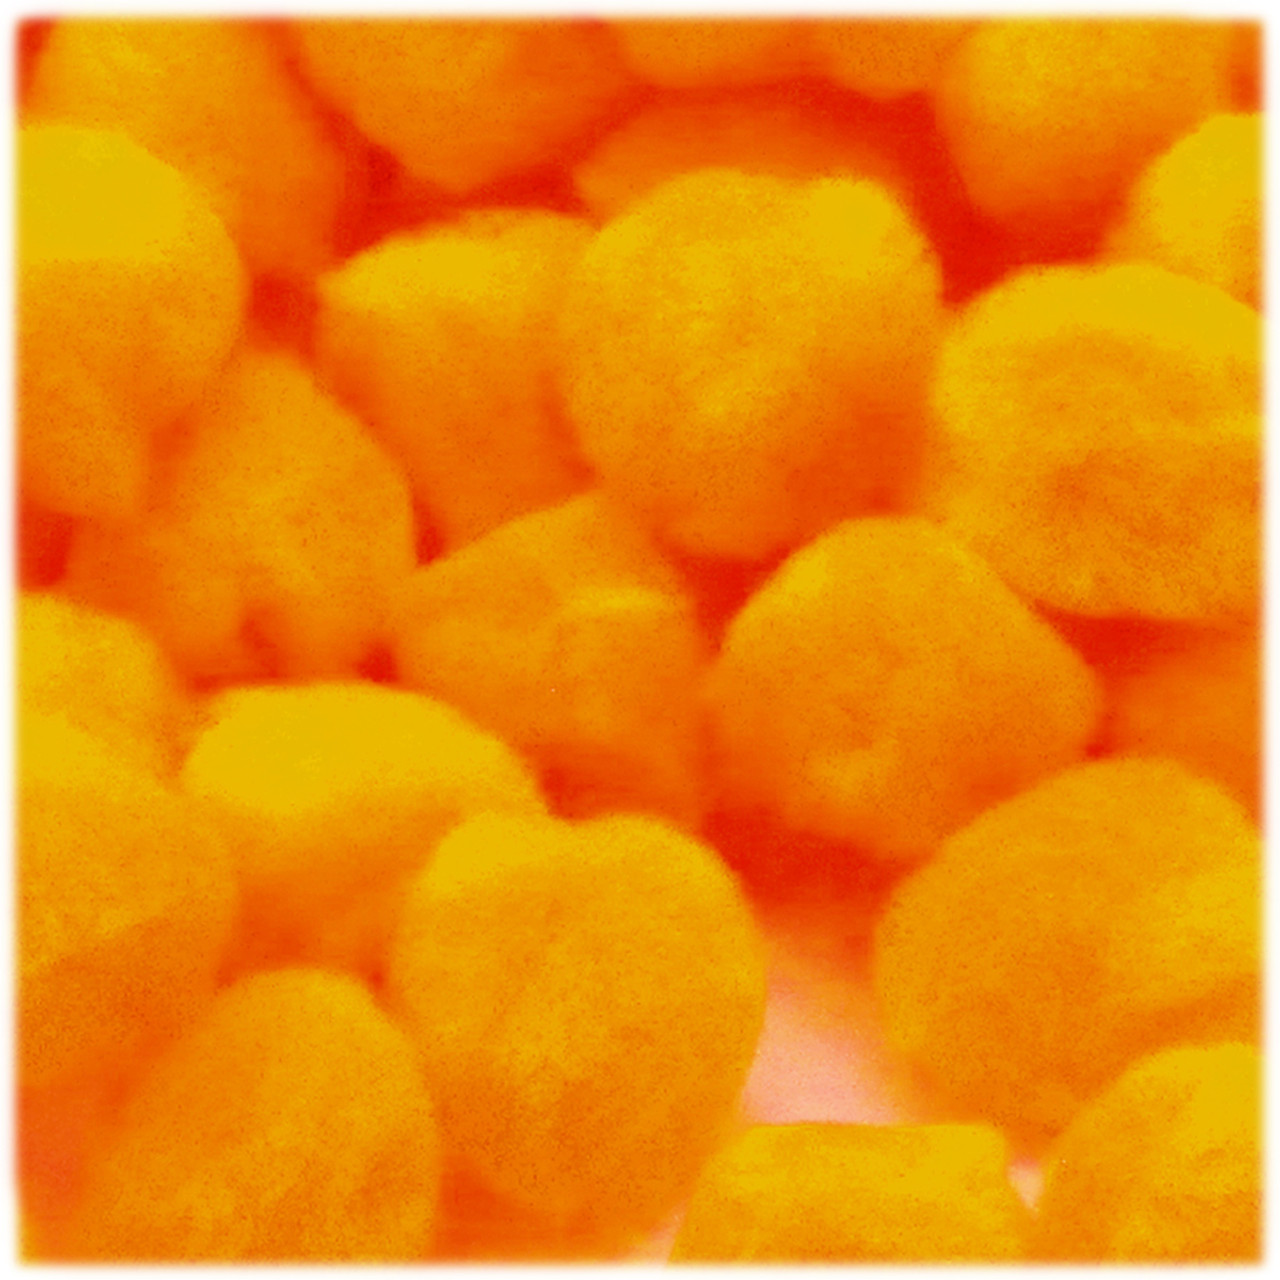 Acrylic Pom Poms, Solid Color, 1.5-inch (38-mm), 50-pc, Yellow